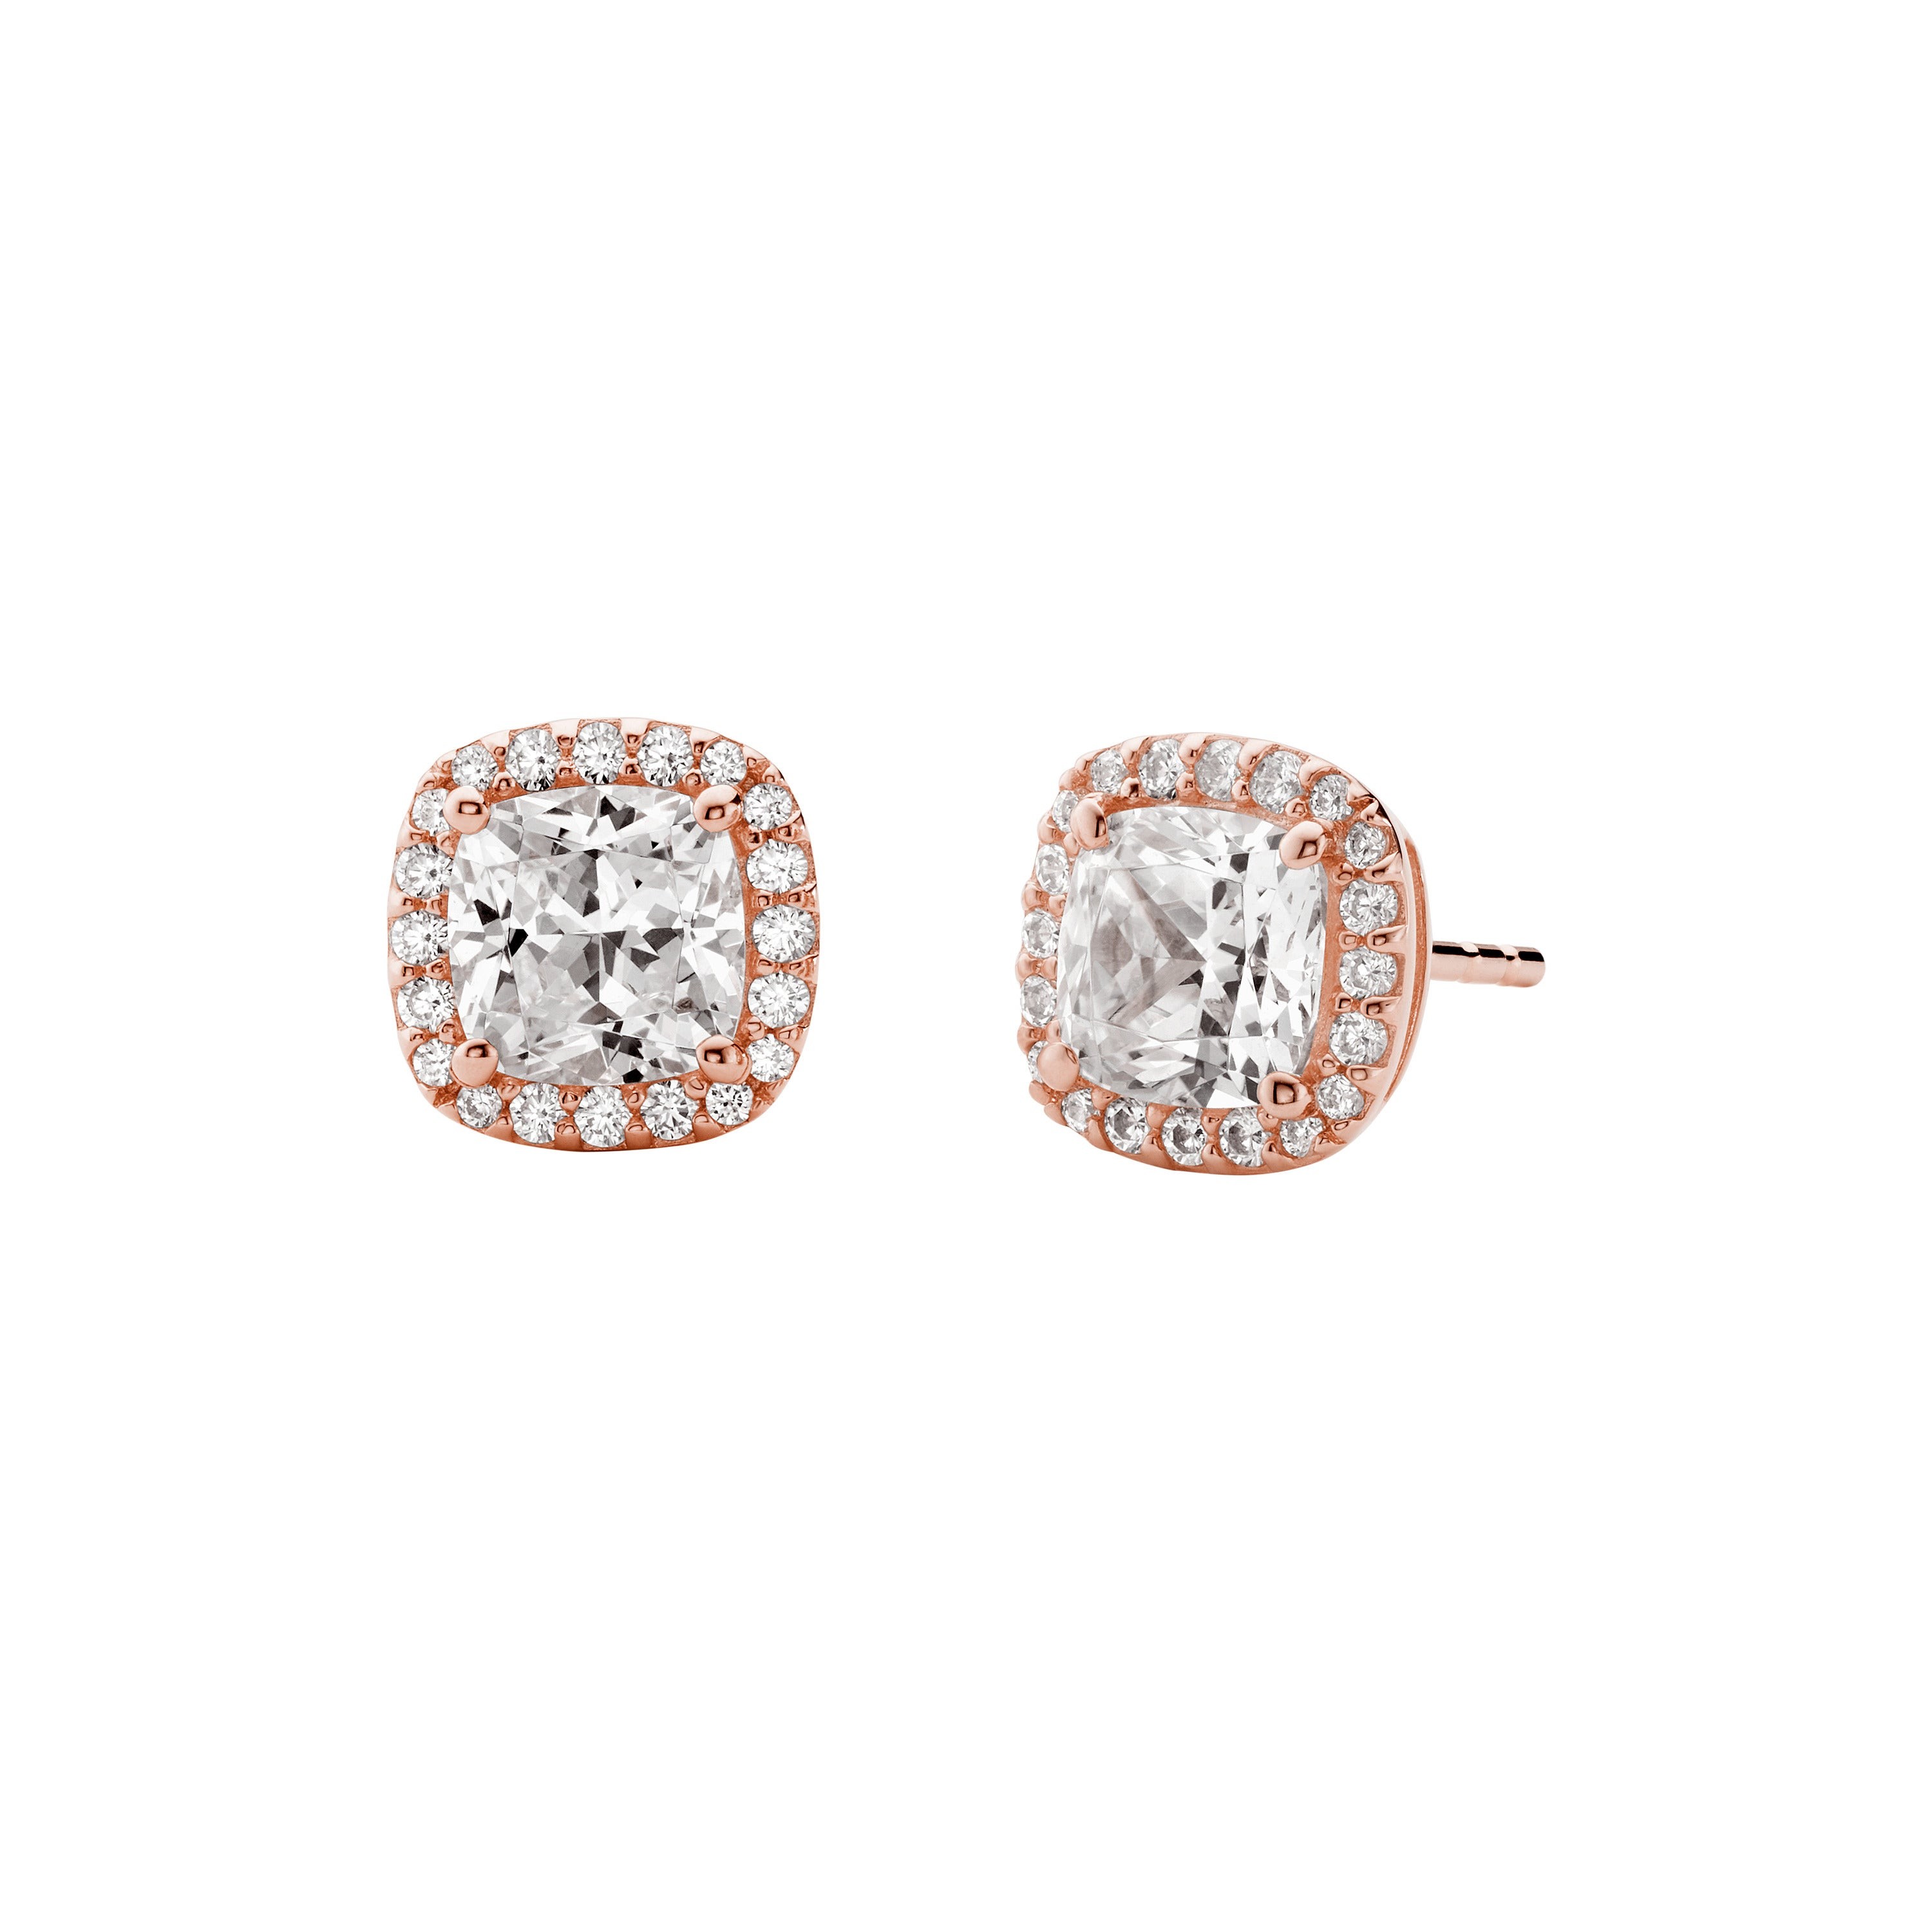 Precious Metal Sterling Silver Pave Square Stud Earrings Rose Gold